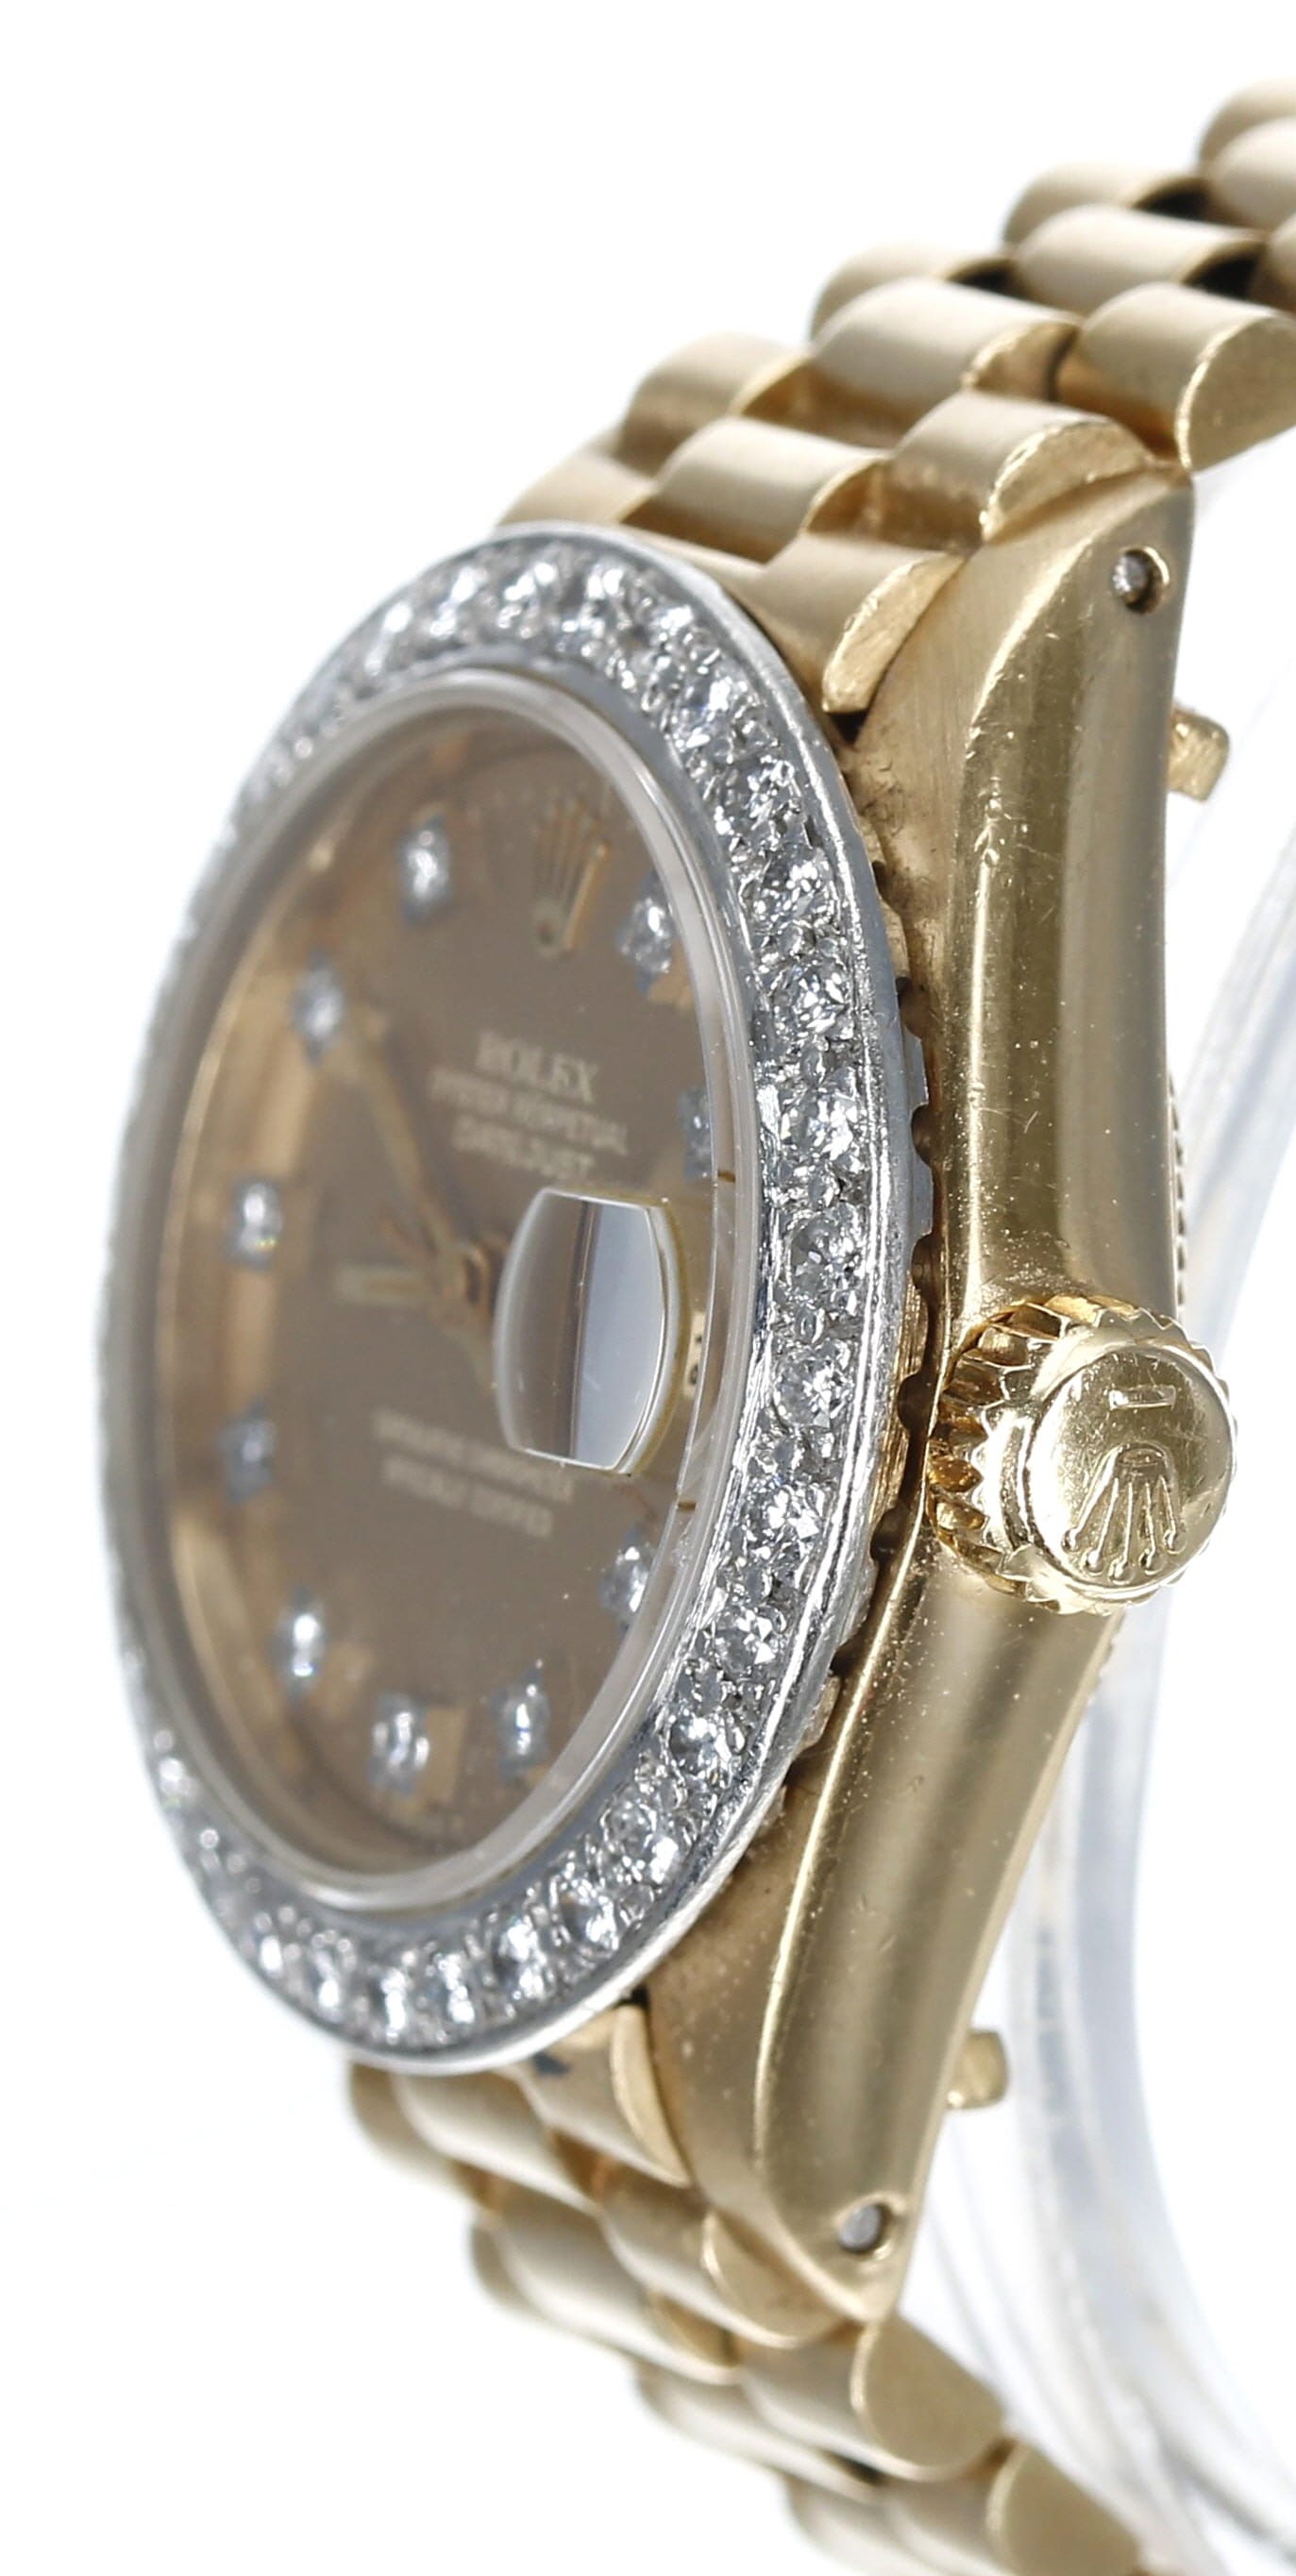 Rolex Oyster Perpetual Datejust 18ct diamond set lady's wristwatch, reference no. 6917, serial no. - Image 3 of 6